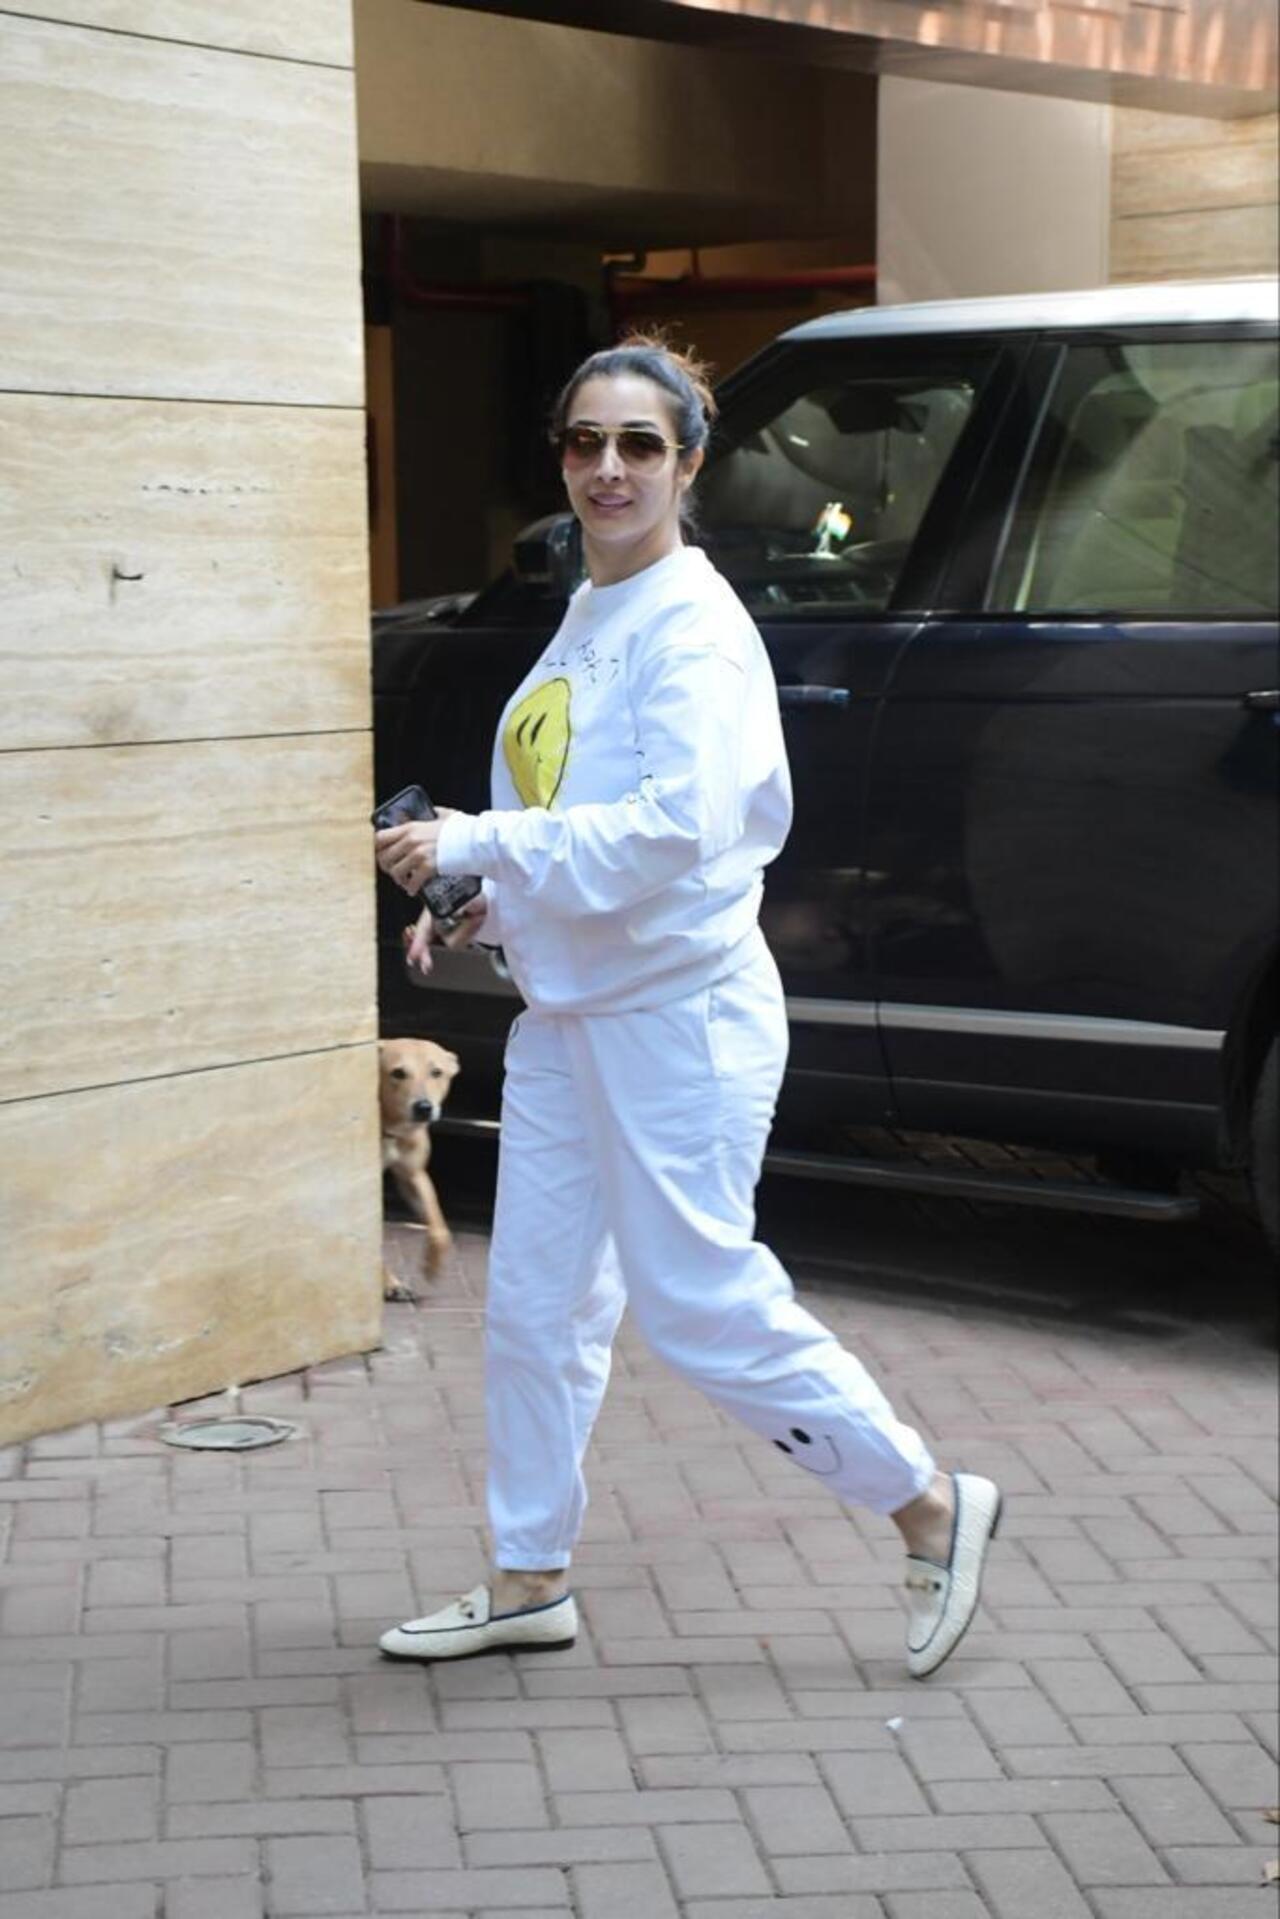 Malaika Arora wore a white-on-white outfit as she went out and about in the city